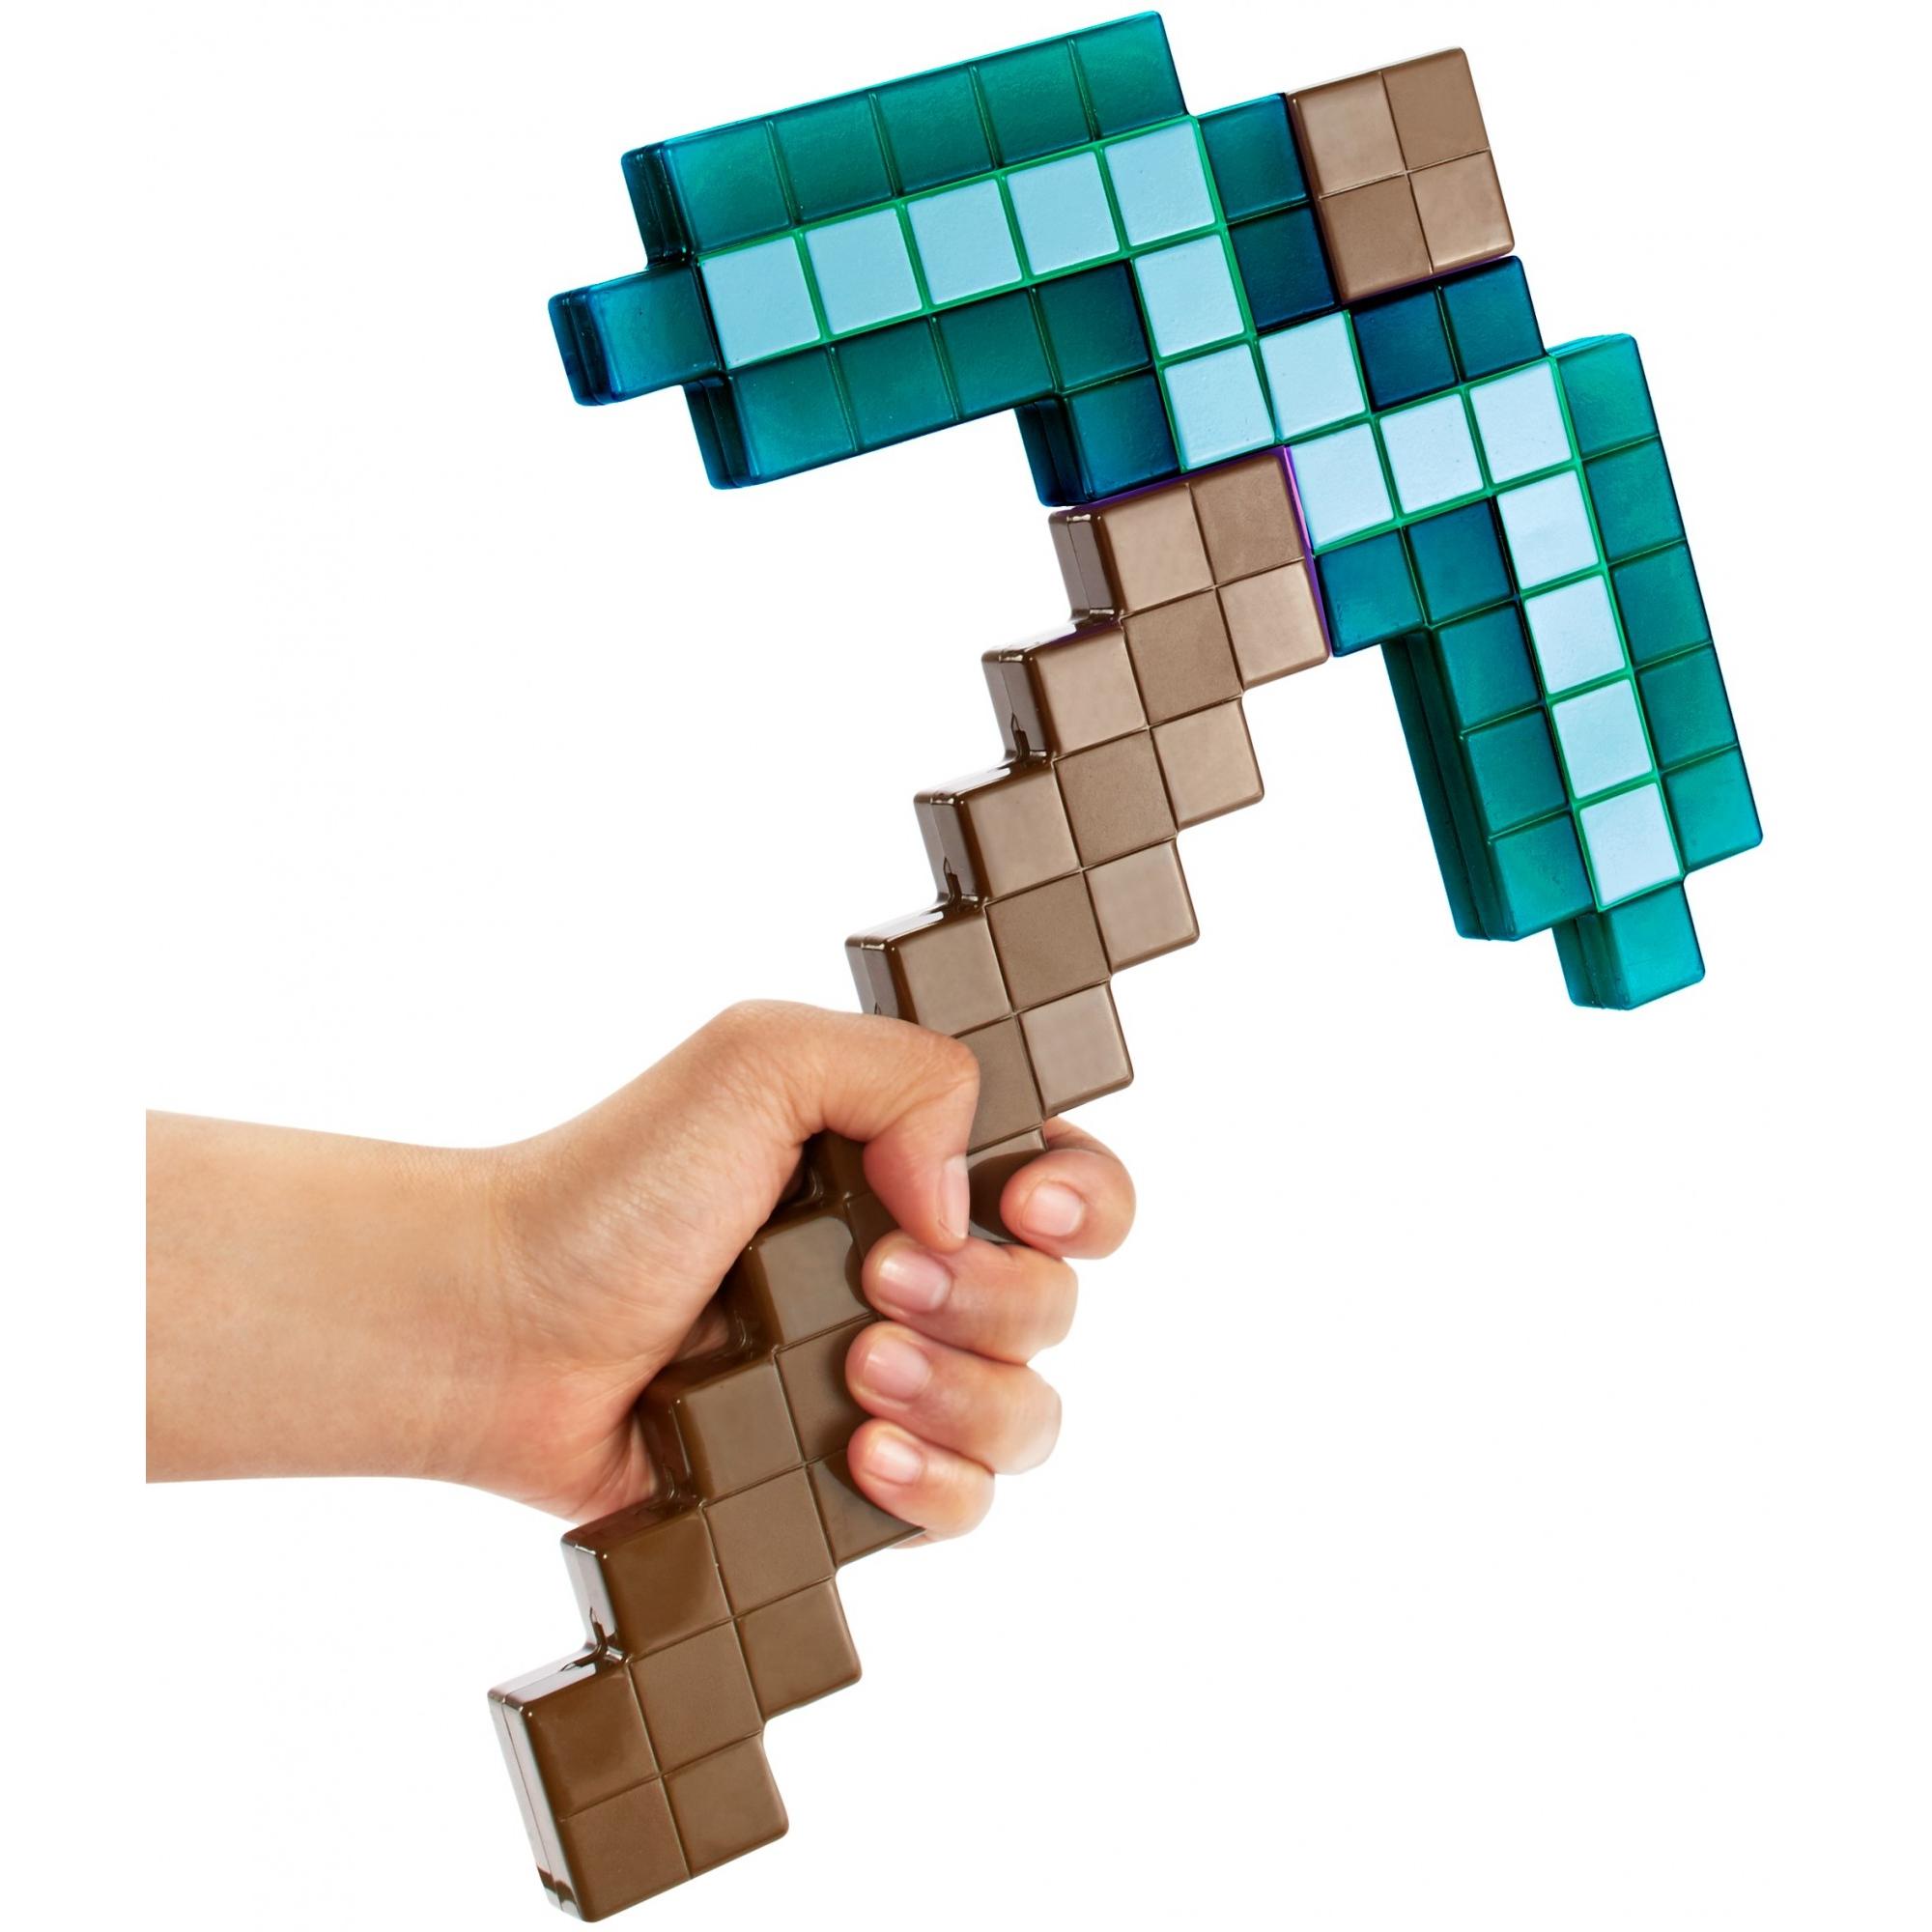 Minecraft Diamond Pickaxe, Life-Sized for Role-Play Fun - image 2 of 4